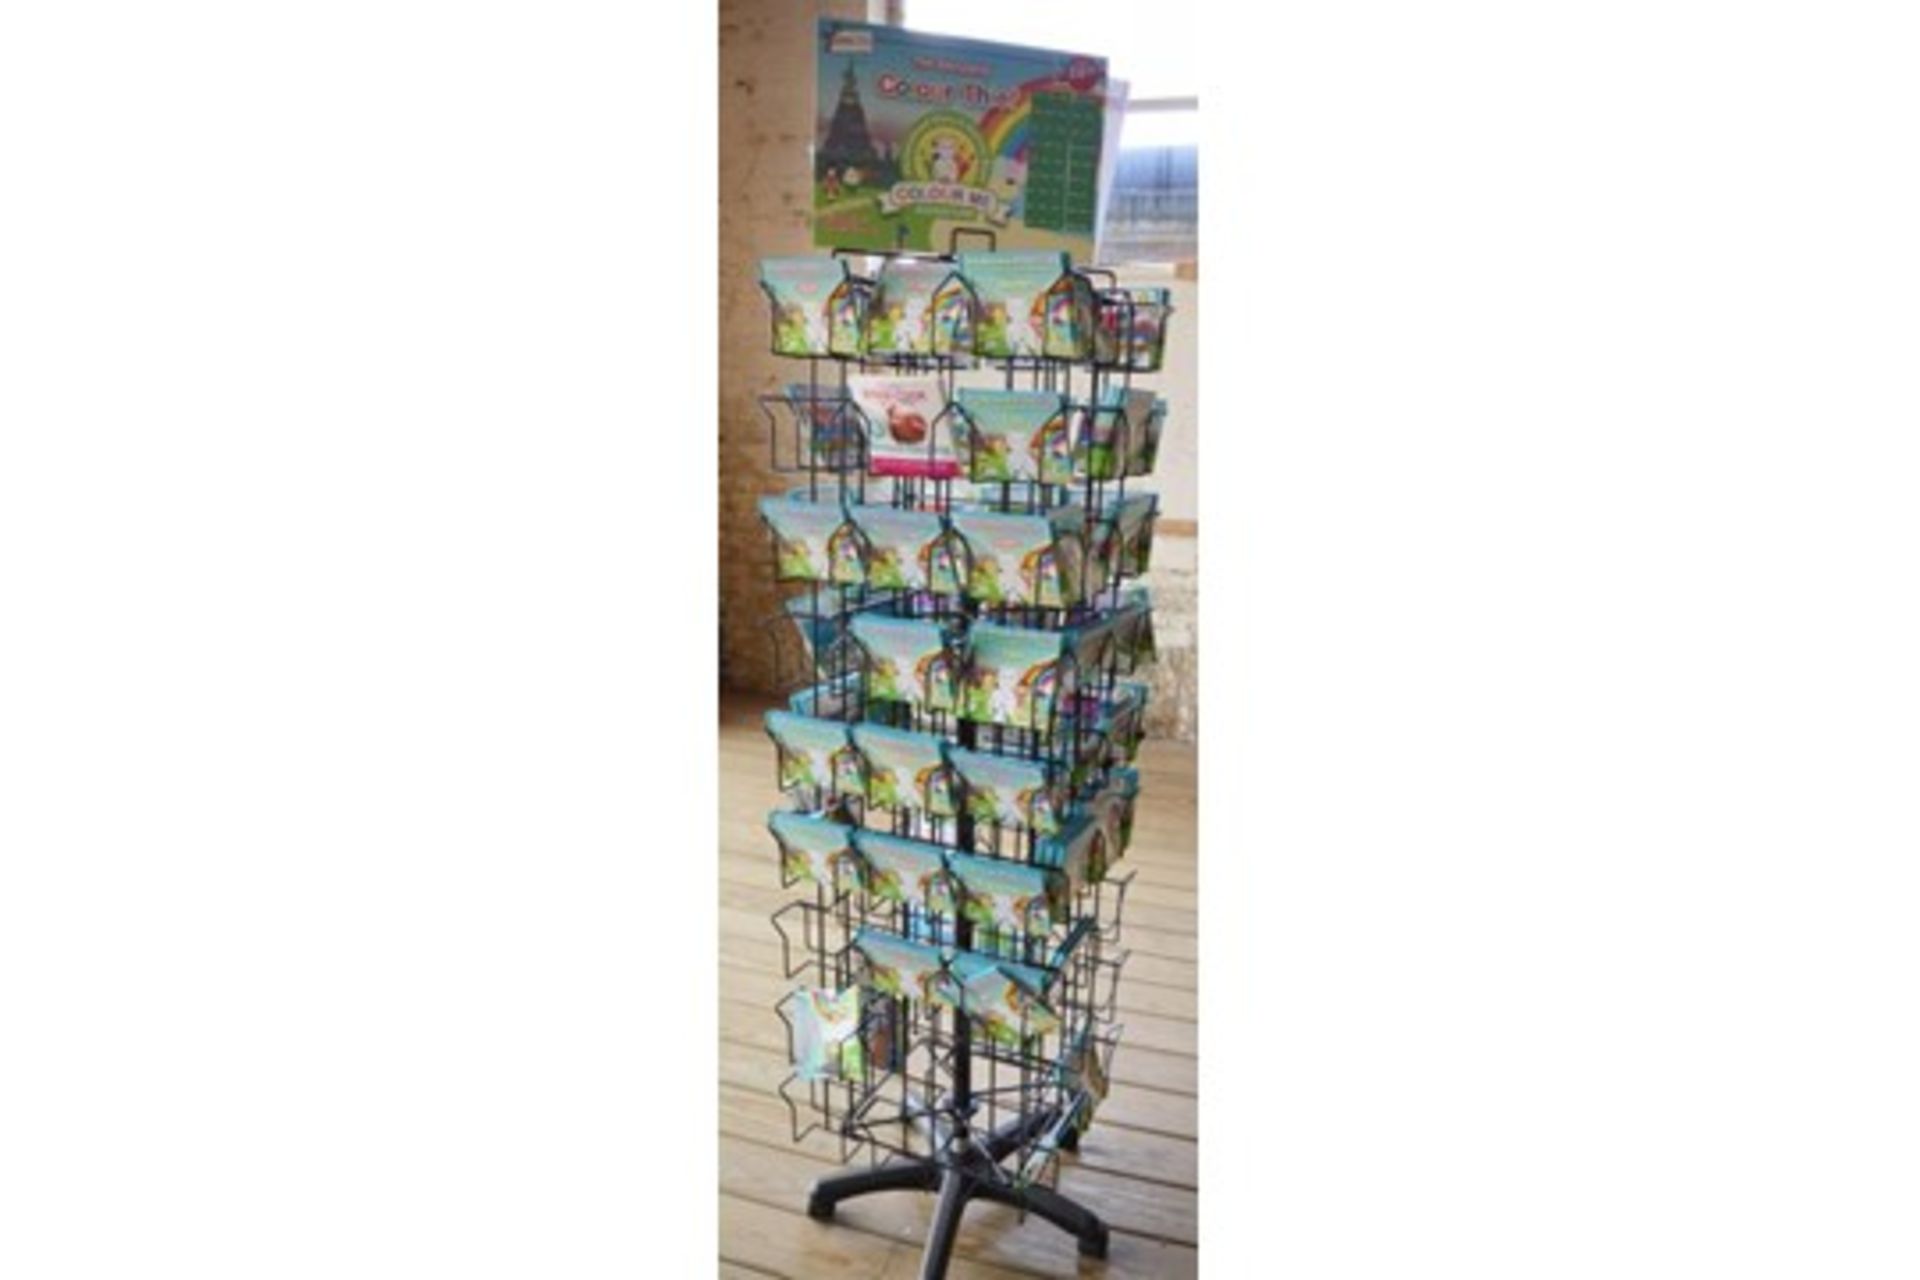 27 x Retail Carousel Display Stands With Approximately 2,800 Items of Resale Stock - Includes - Image 11 of 61